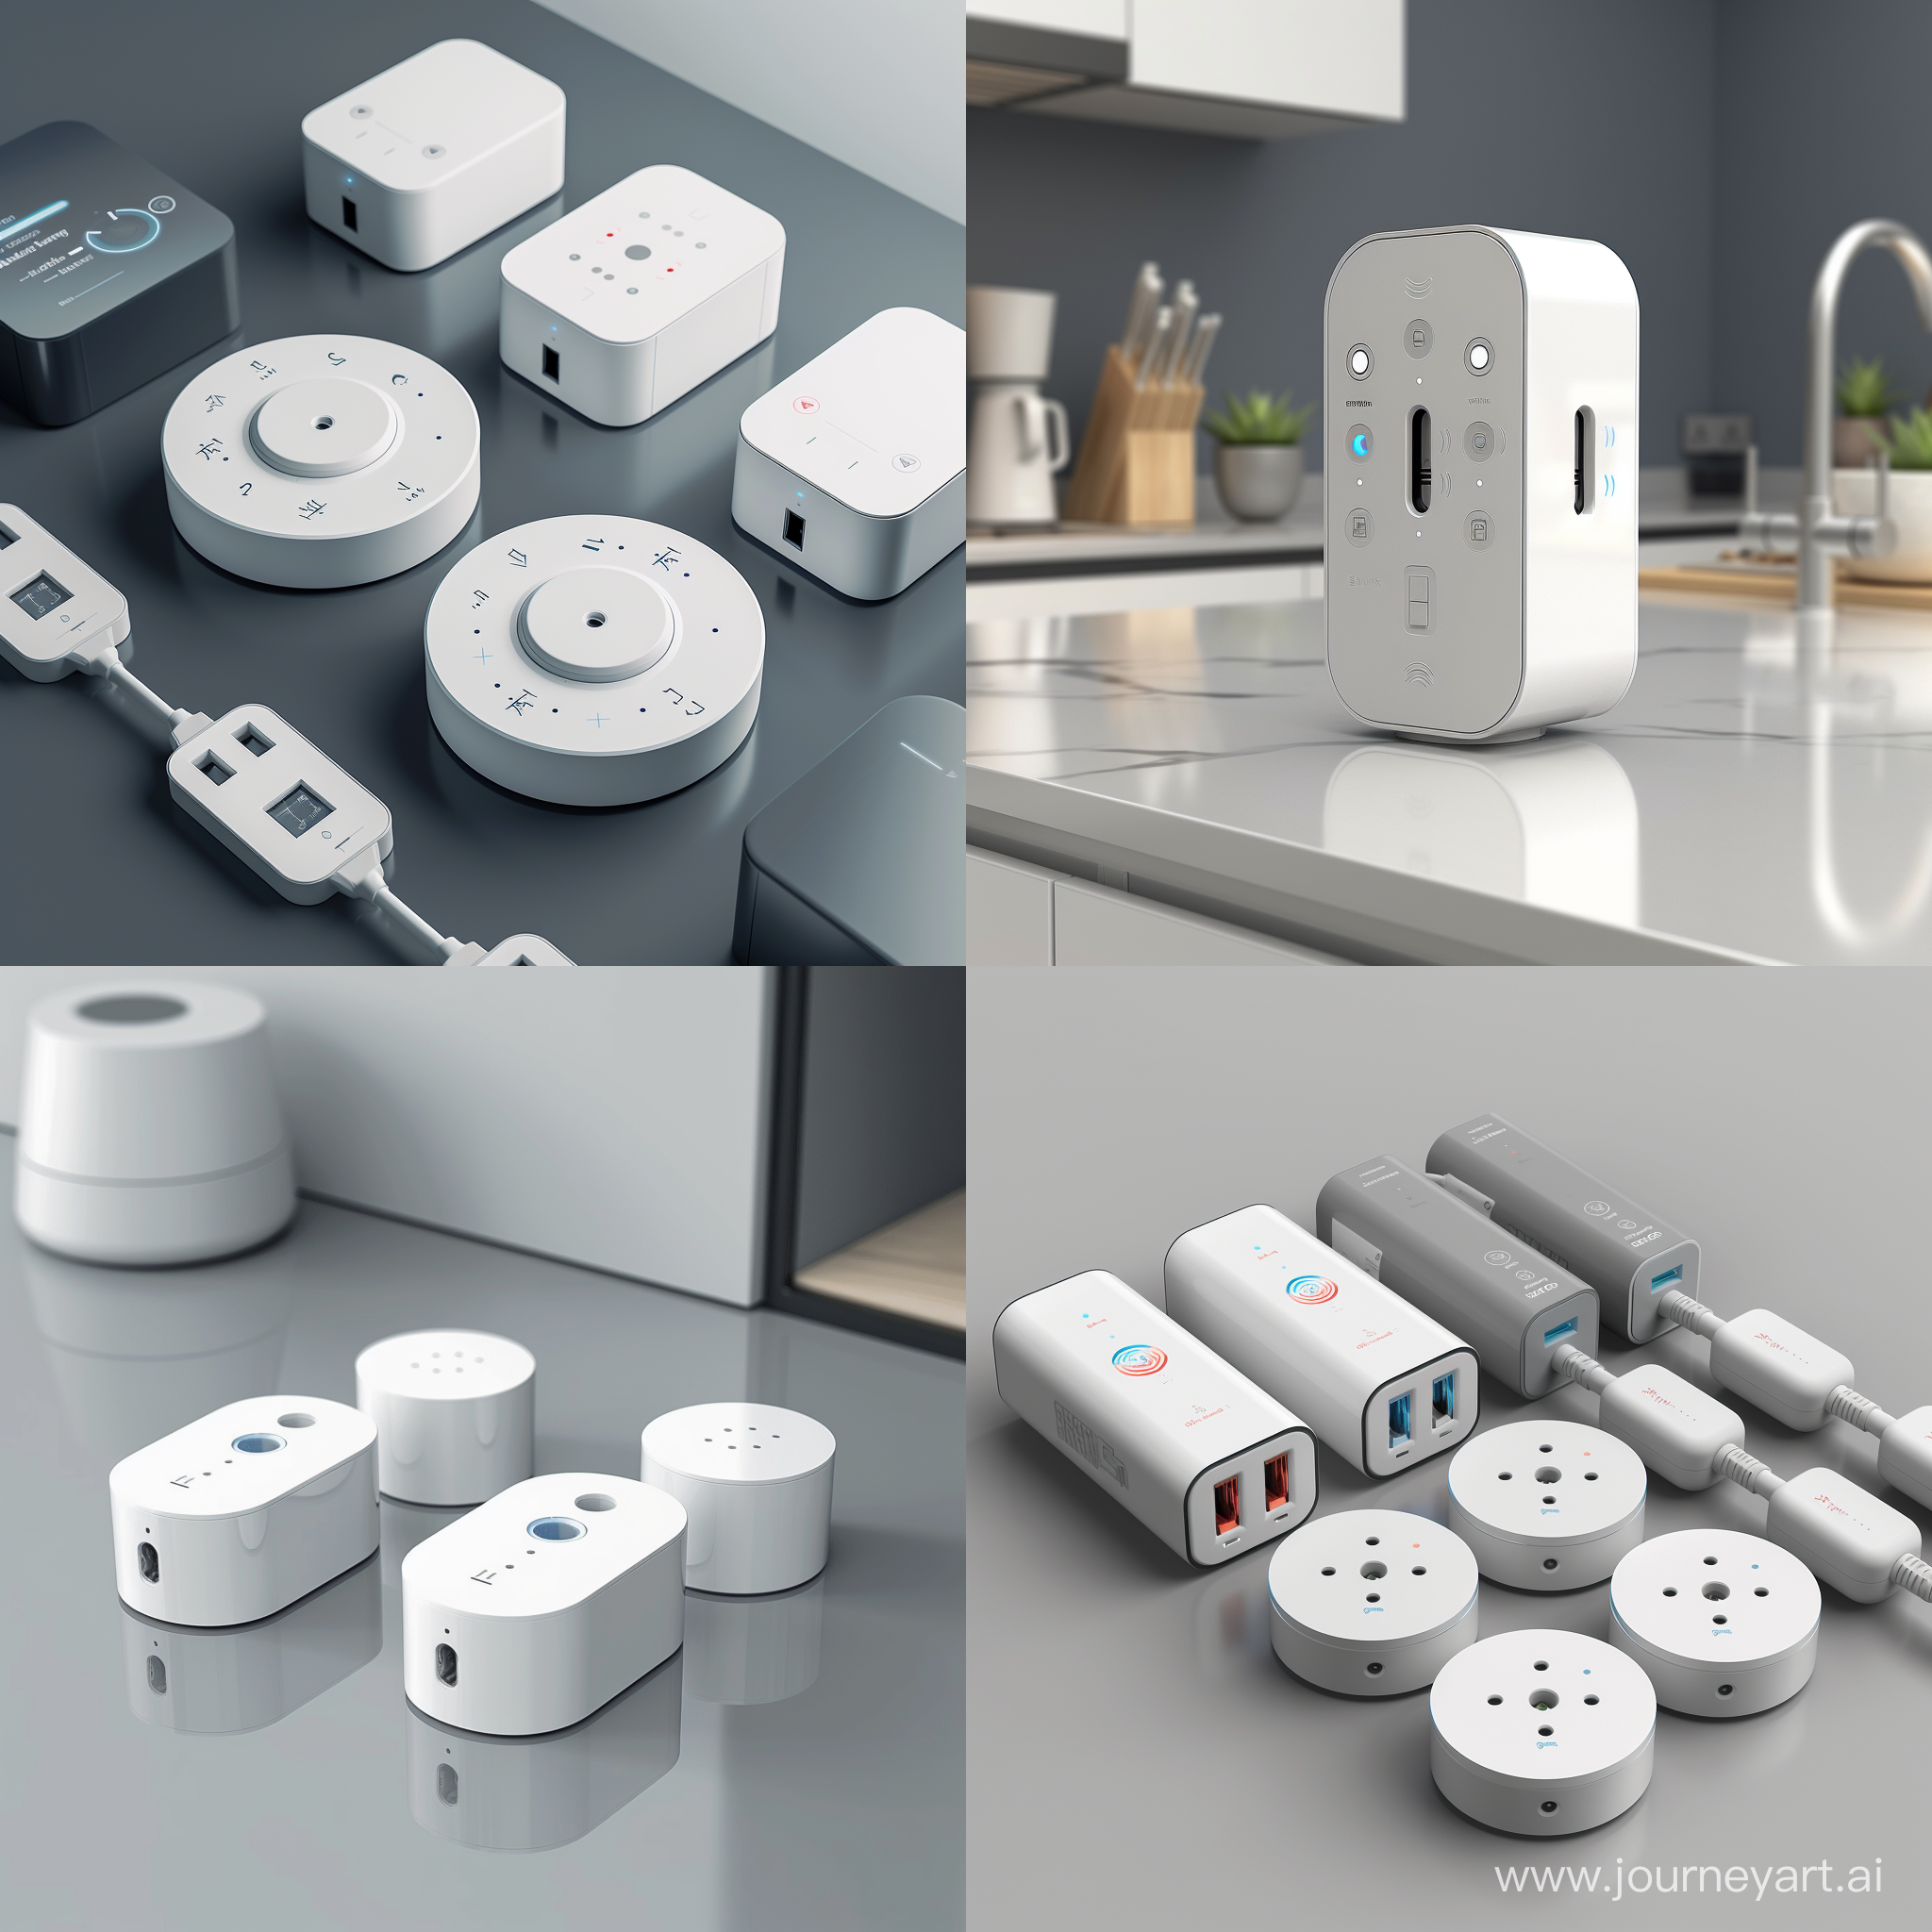 imagine of- Design the smart plugs with a touch-sensitive surface for easy manual control, in addition to the automated monitoring and control features.
- Incorporate a mobile app for remote monitoring and control, allowing users to easily track energy usage and make adjustments from anywhere.
- Include compatibility with voice assistants such as Alexa or Google Assistant for convenient hands-free control of connected devices.
- Integrate surge protection and overload detection to ensure the safety of both the smart plugs and the connected devices.
- Offer a set of multiple plugs that can be controlled as a group, allowing users to create custom schedules and settings for different areas of their home.
- Provide an option for adjustable plug angles to accommodate different orientations and configurations of power outlets.
- Explore the possibility of integrating renewable energy tracking, allowing users to see the impact of their sustainable energy sources on their overall usage.
- Consider a modular design that allows for easy upgrades or expansions in the future, ensuring longevity and adaptability of the smart plug system.realistic style